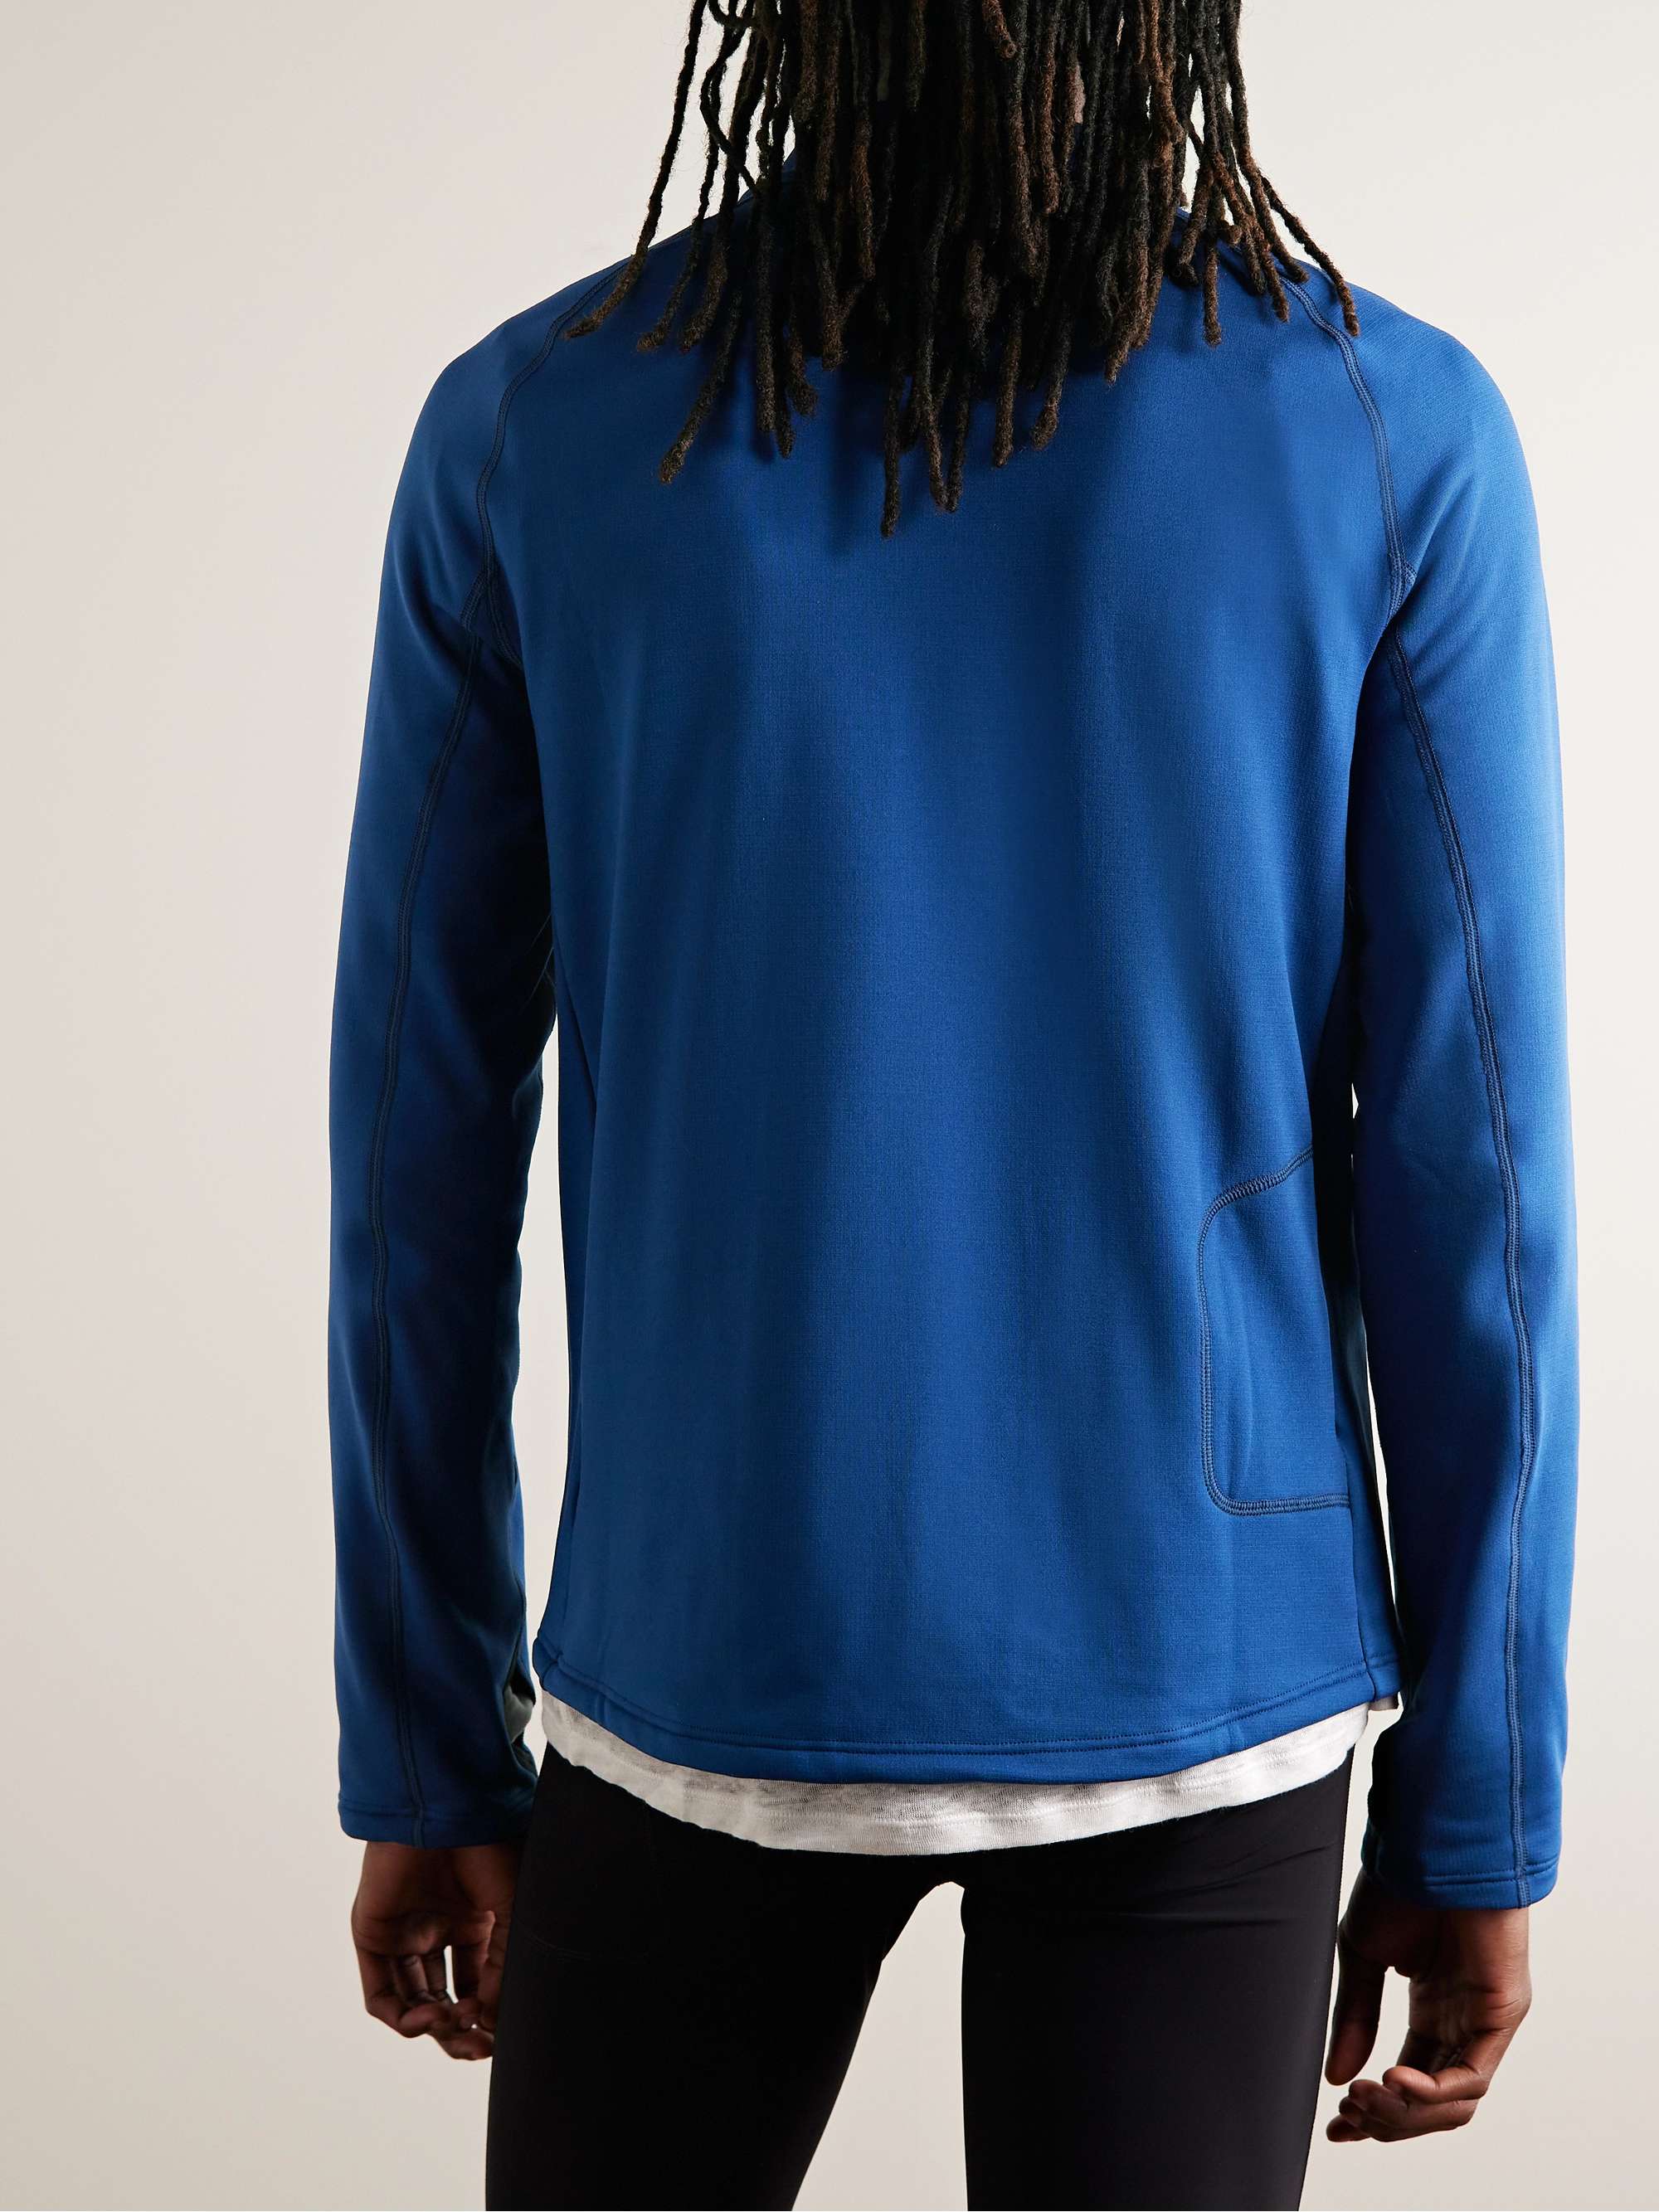 DISTRICT VISION Luca Shell-Trimmed Recycled Stretch-Jersey Half-Zip Running Top